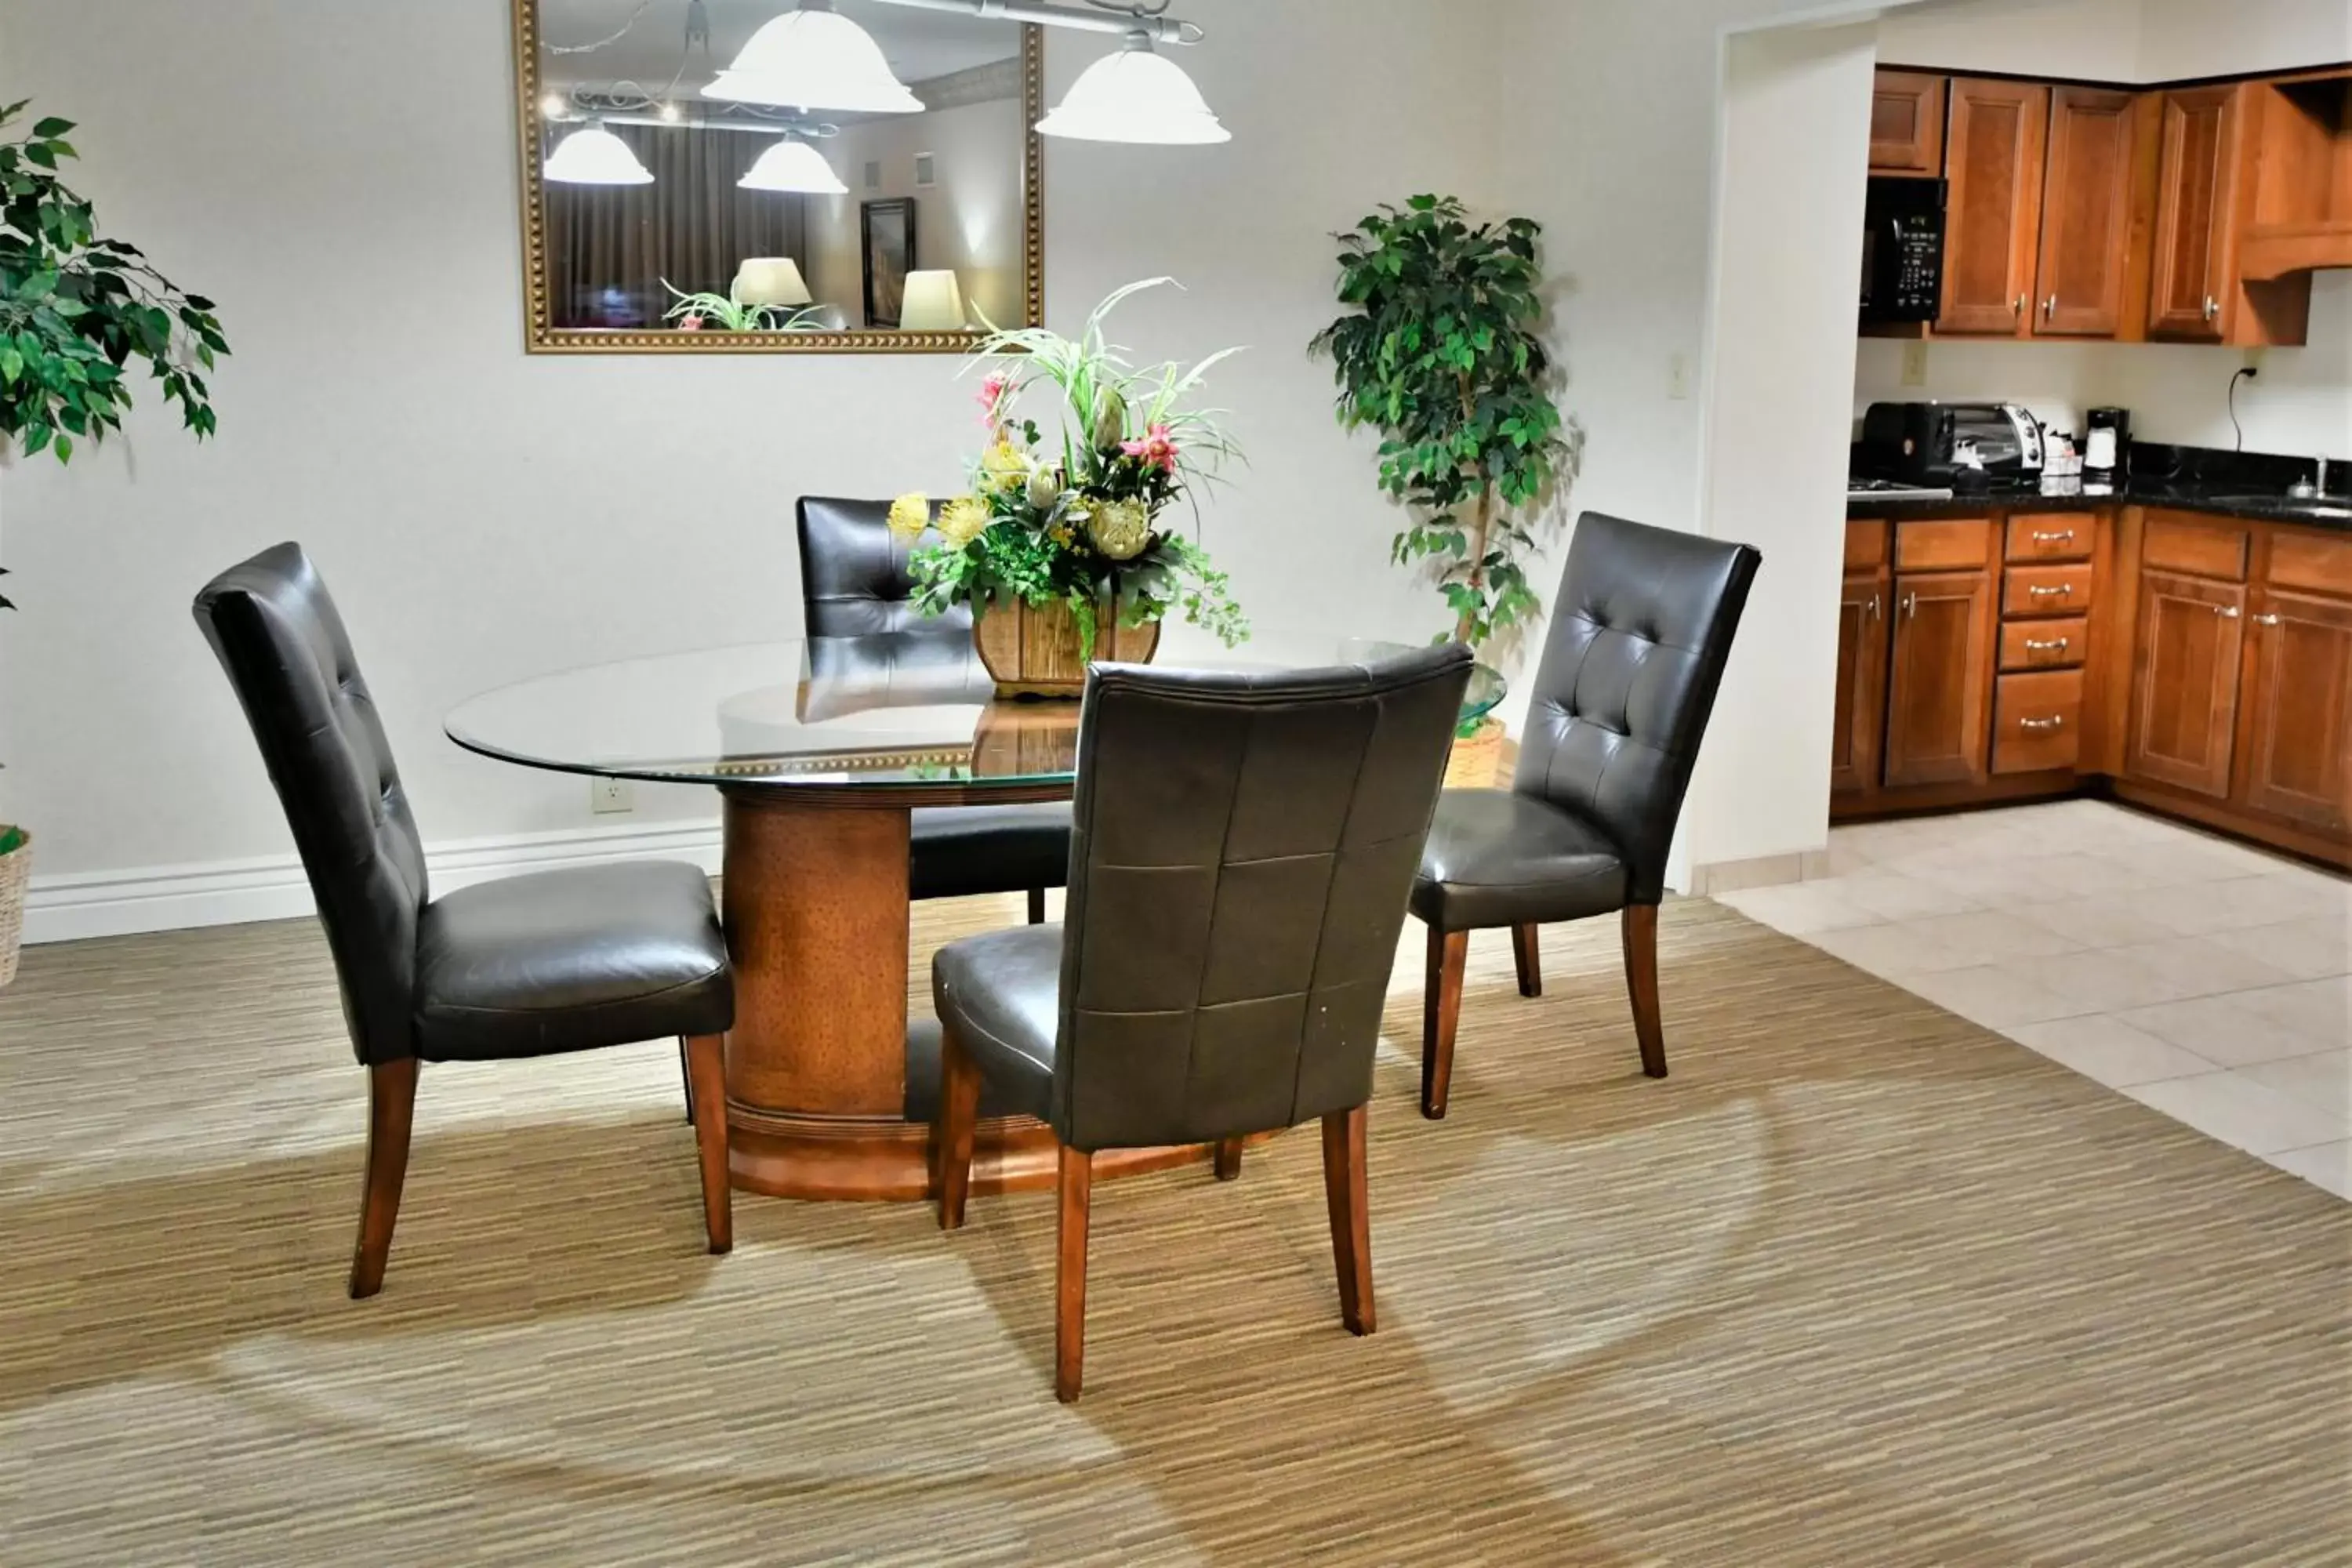 Seating area, Dining Area in Ramada by Wyndham Jacksonville Hotel & Conference Center